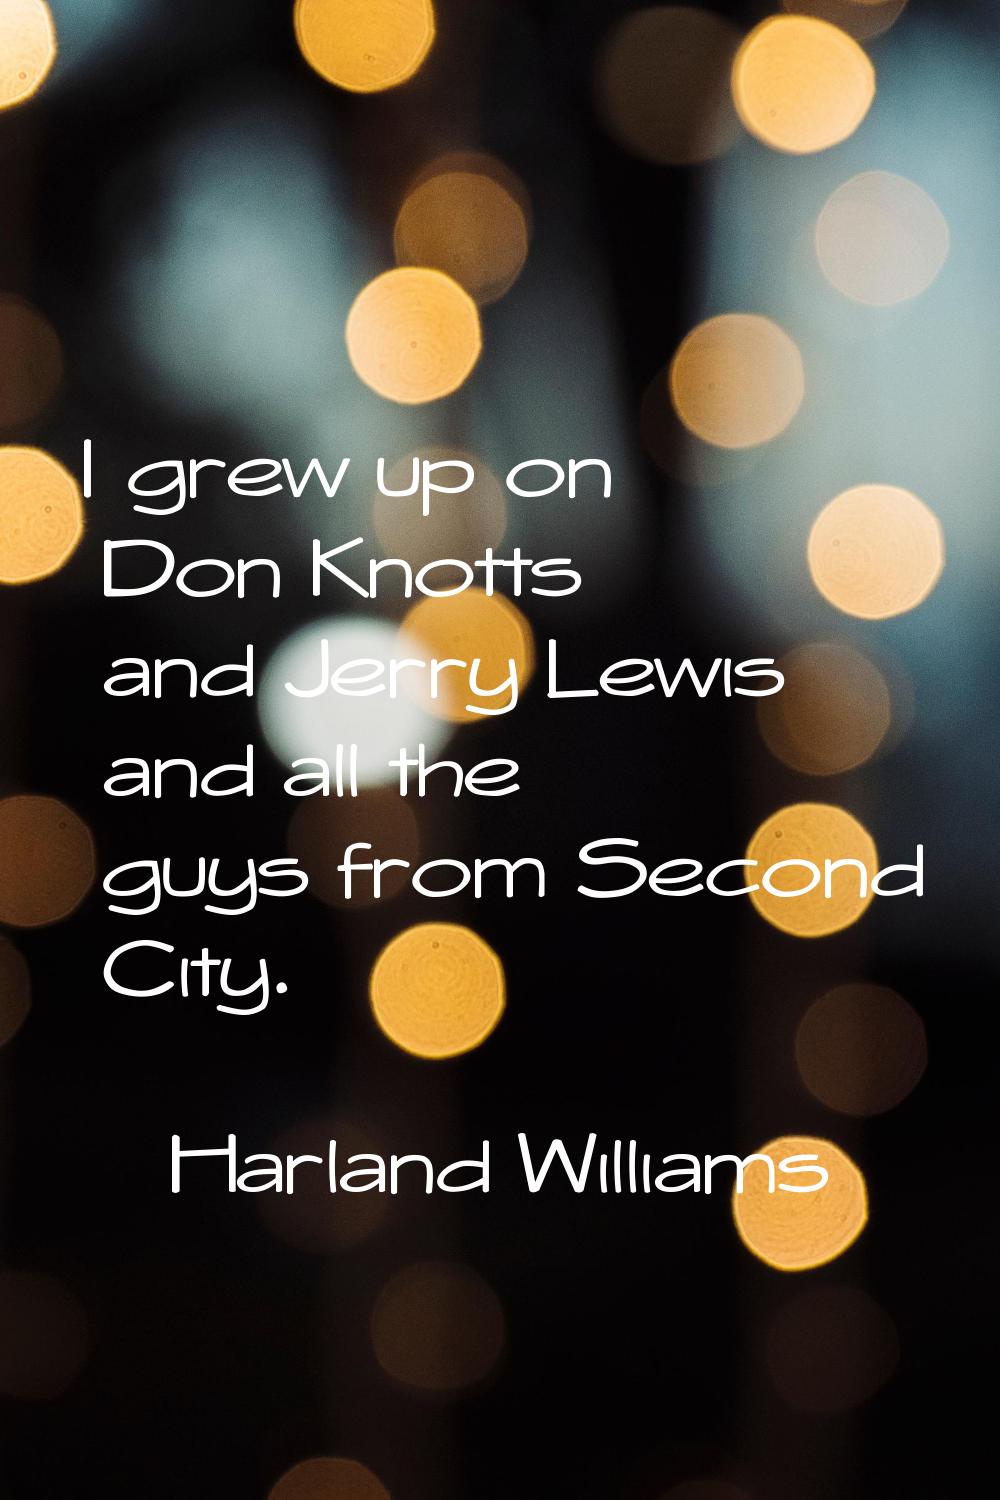 I grew up on Don Knotts and Jerry Lewis and all the guys from Second City.